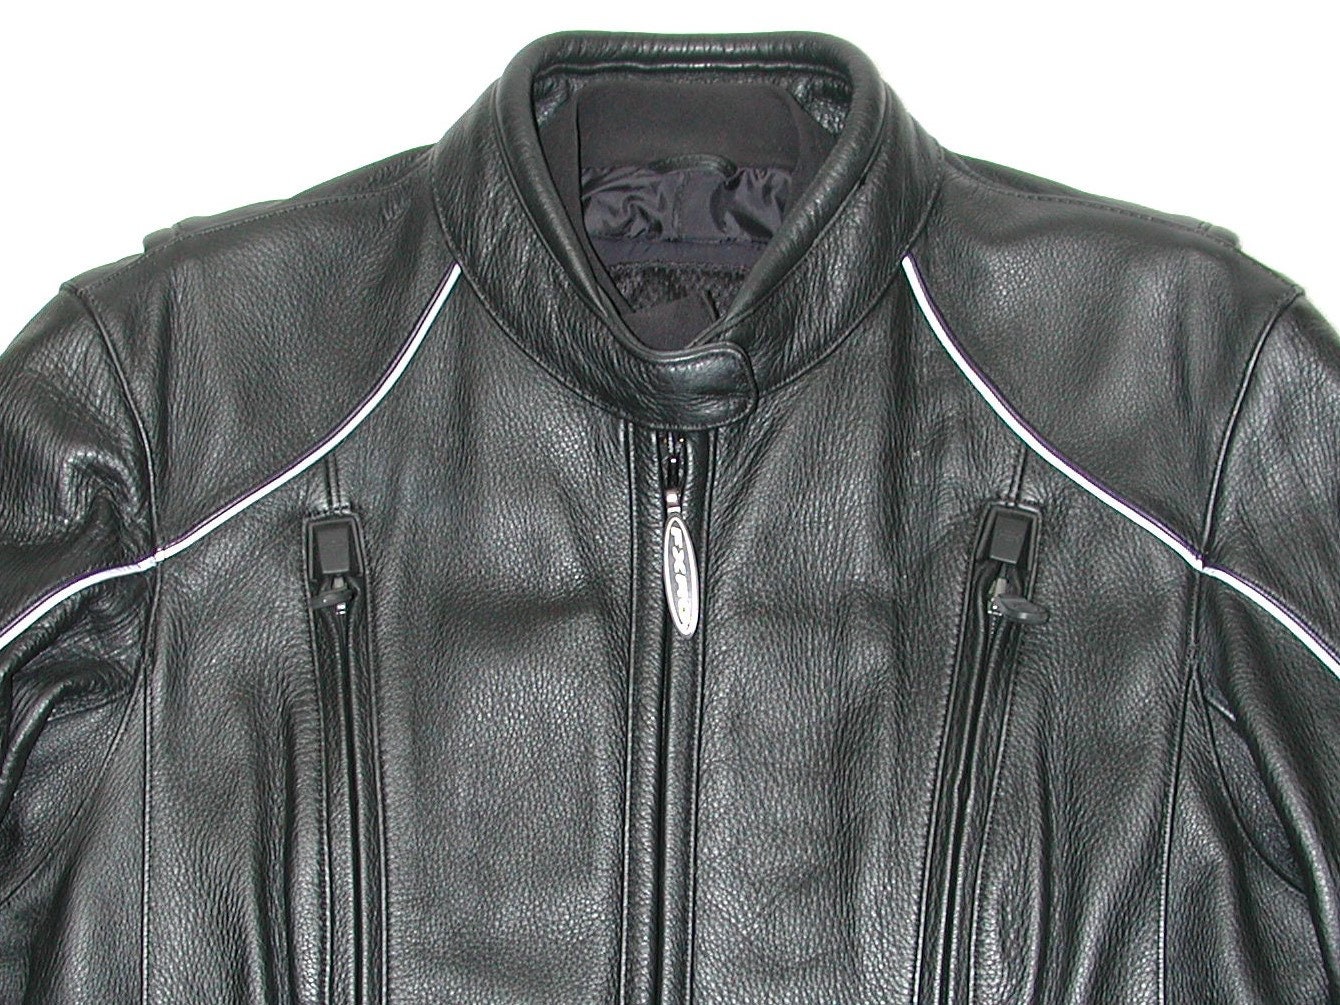 Harley Davidson FXRG Leather Jacket - clothing & accessories - by owner -  apparel sale - craigslist